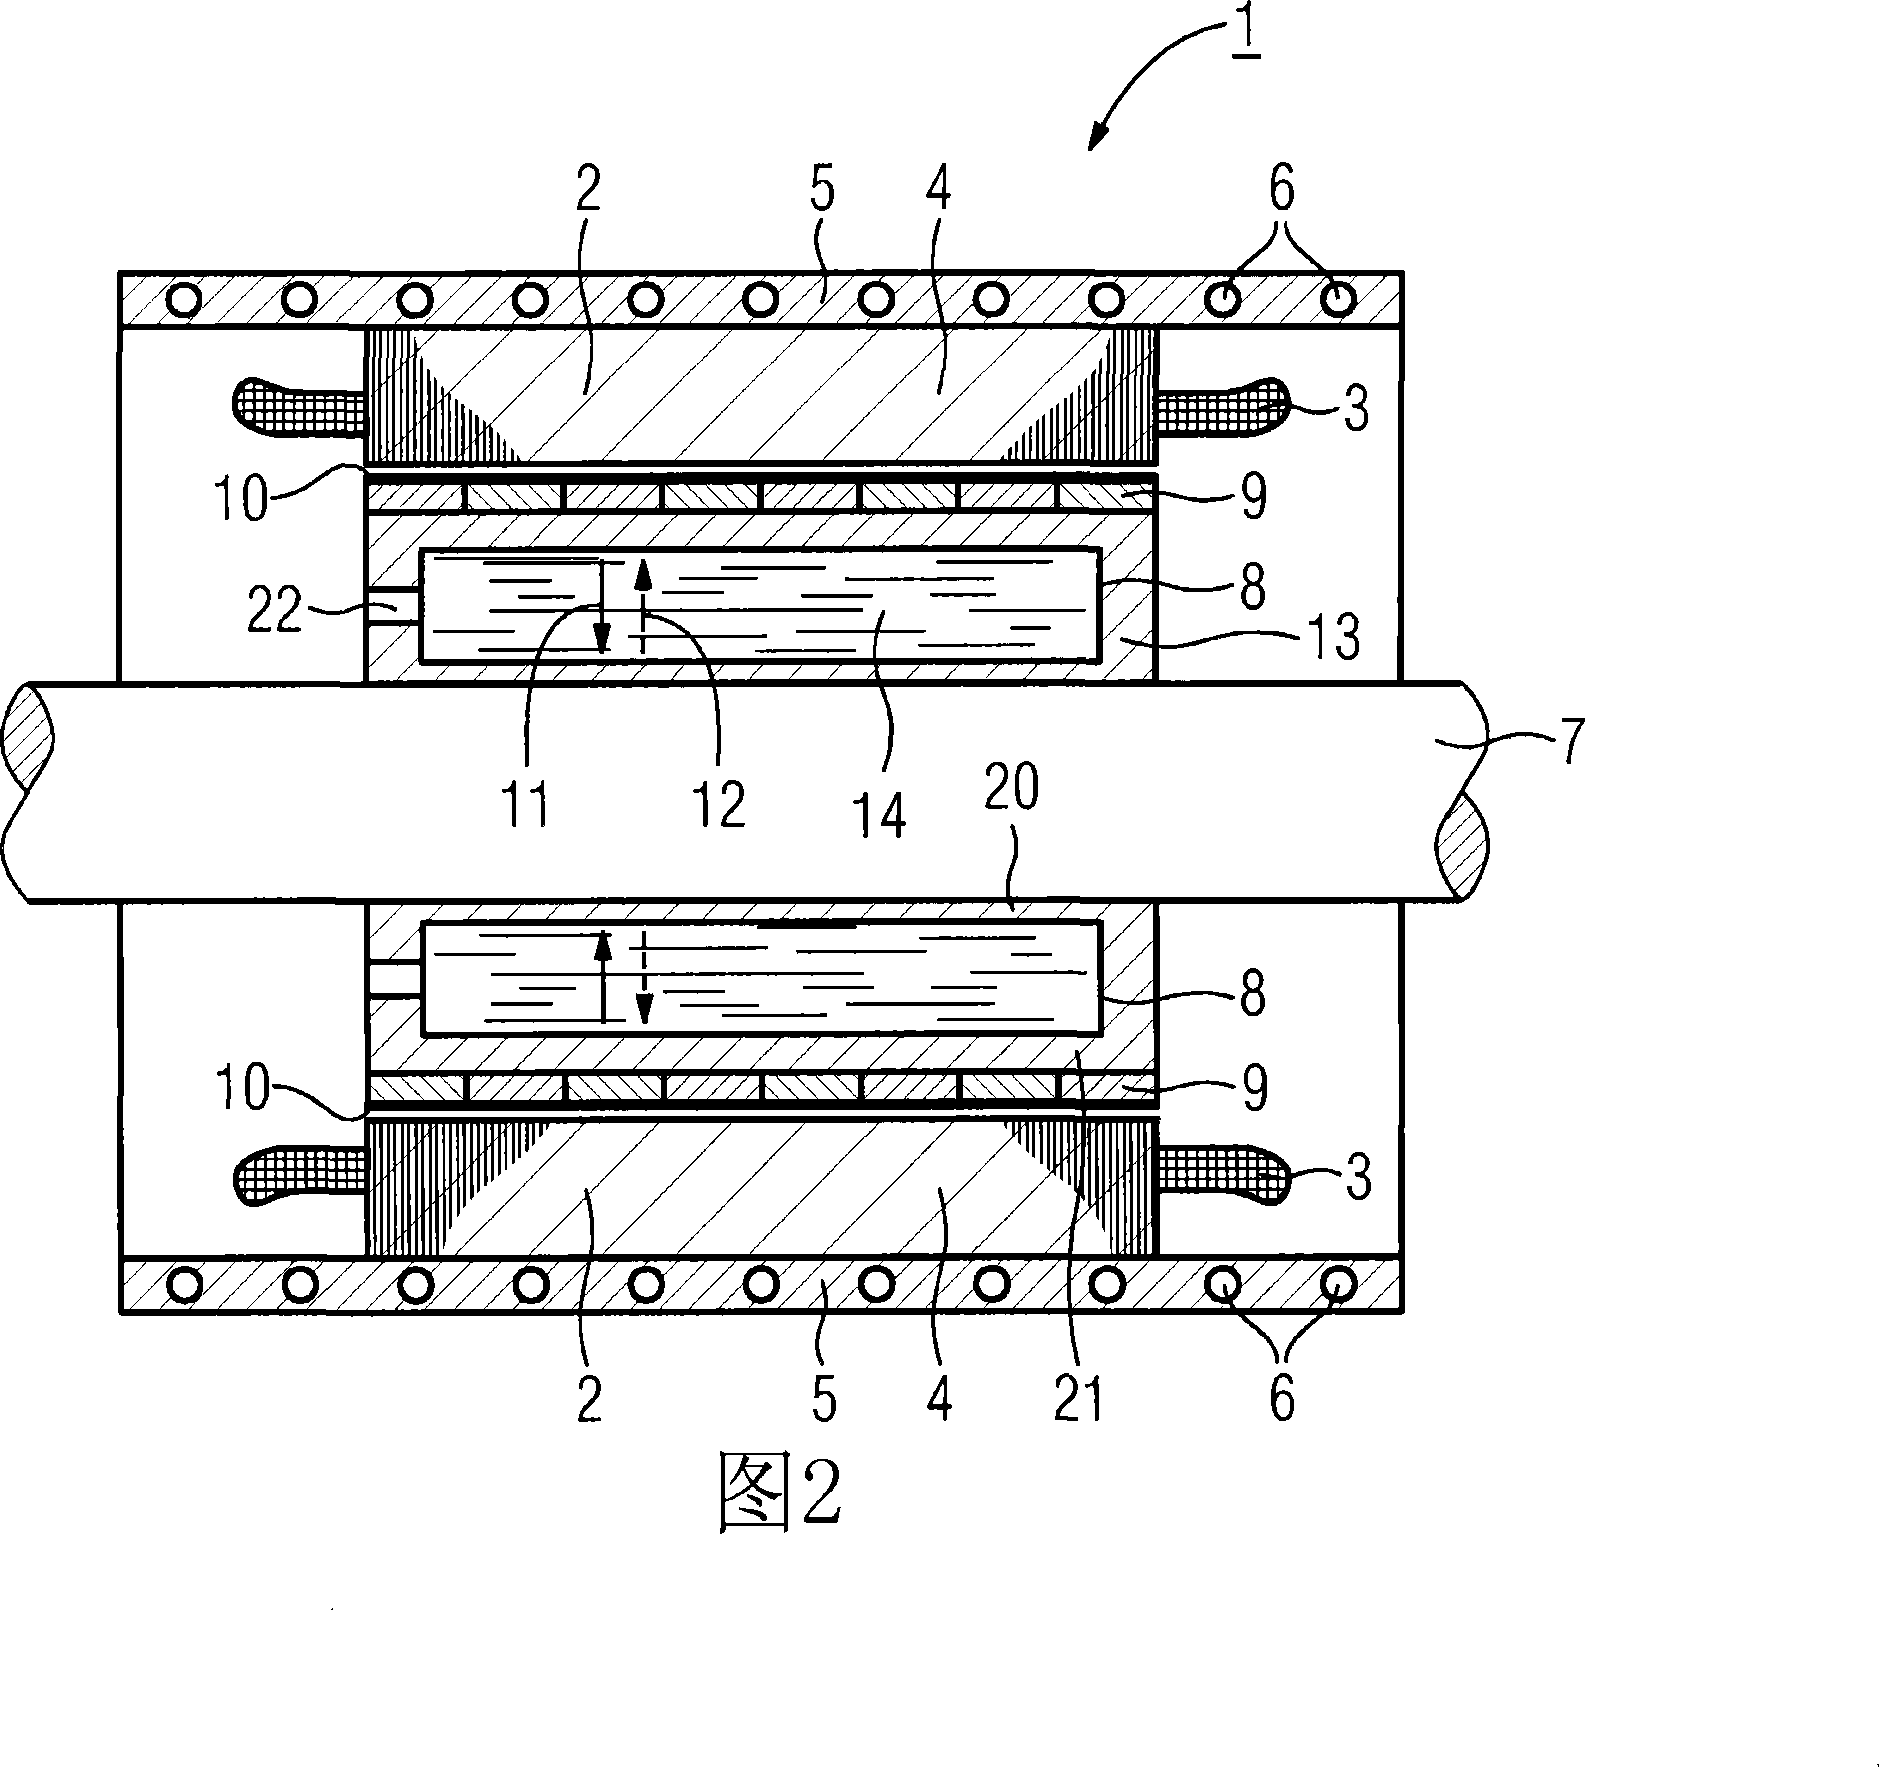 Electric motor with permanent magnet excitation and rotor cooling